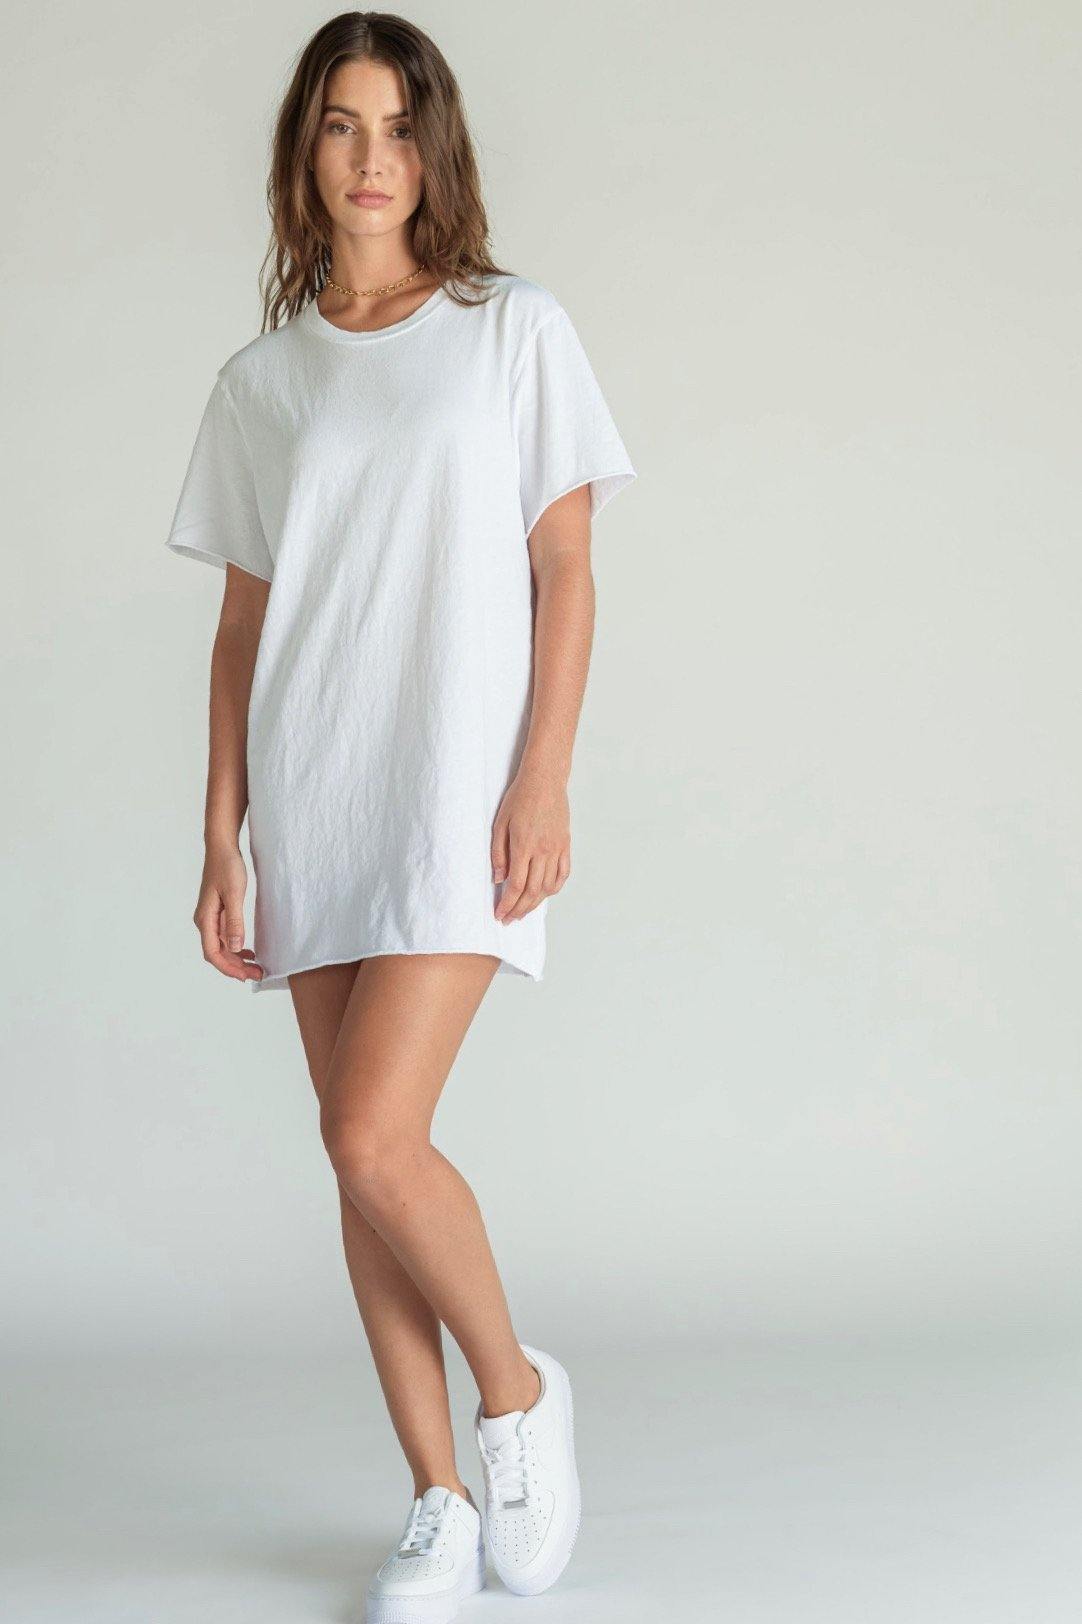 This super soft mini dress feels like a vintage concert tee. The perfect tee-shirt made into a dress with a raw hem and sleeve. Easy to wear, day to night, night to day. 100% crisp cotton. Many perfectly curated hues to choose from. Pictured in White.